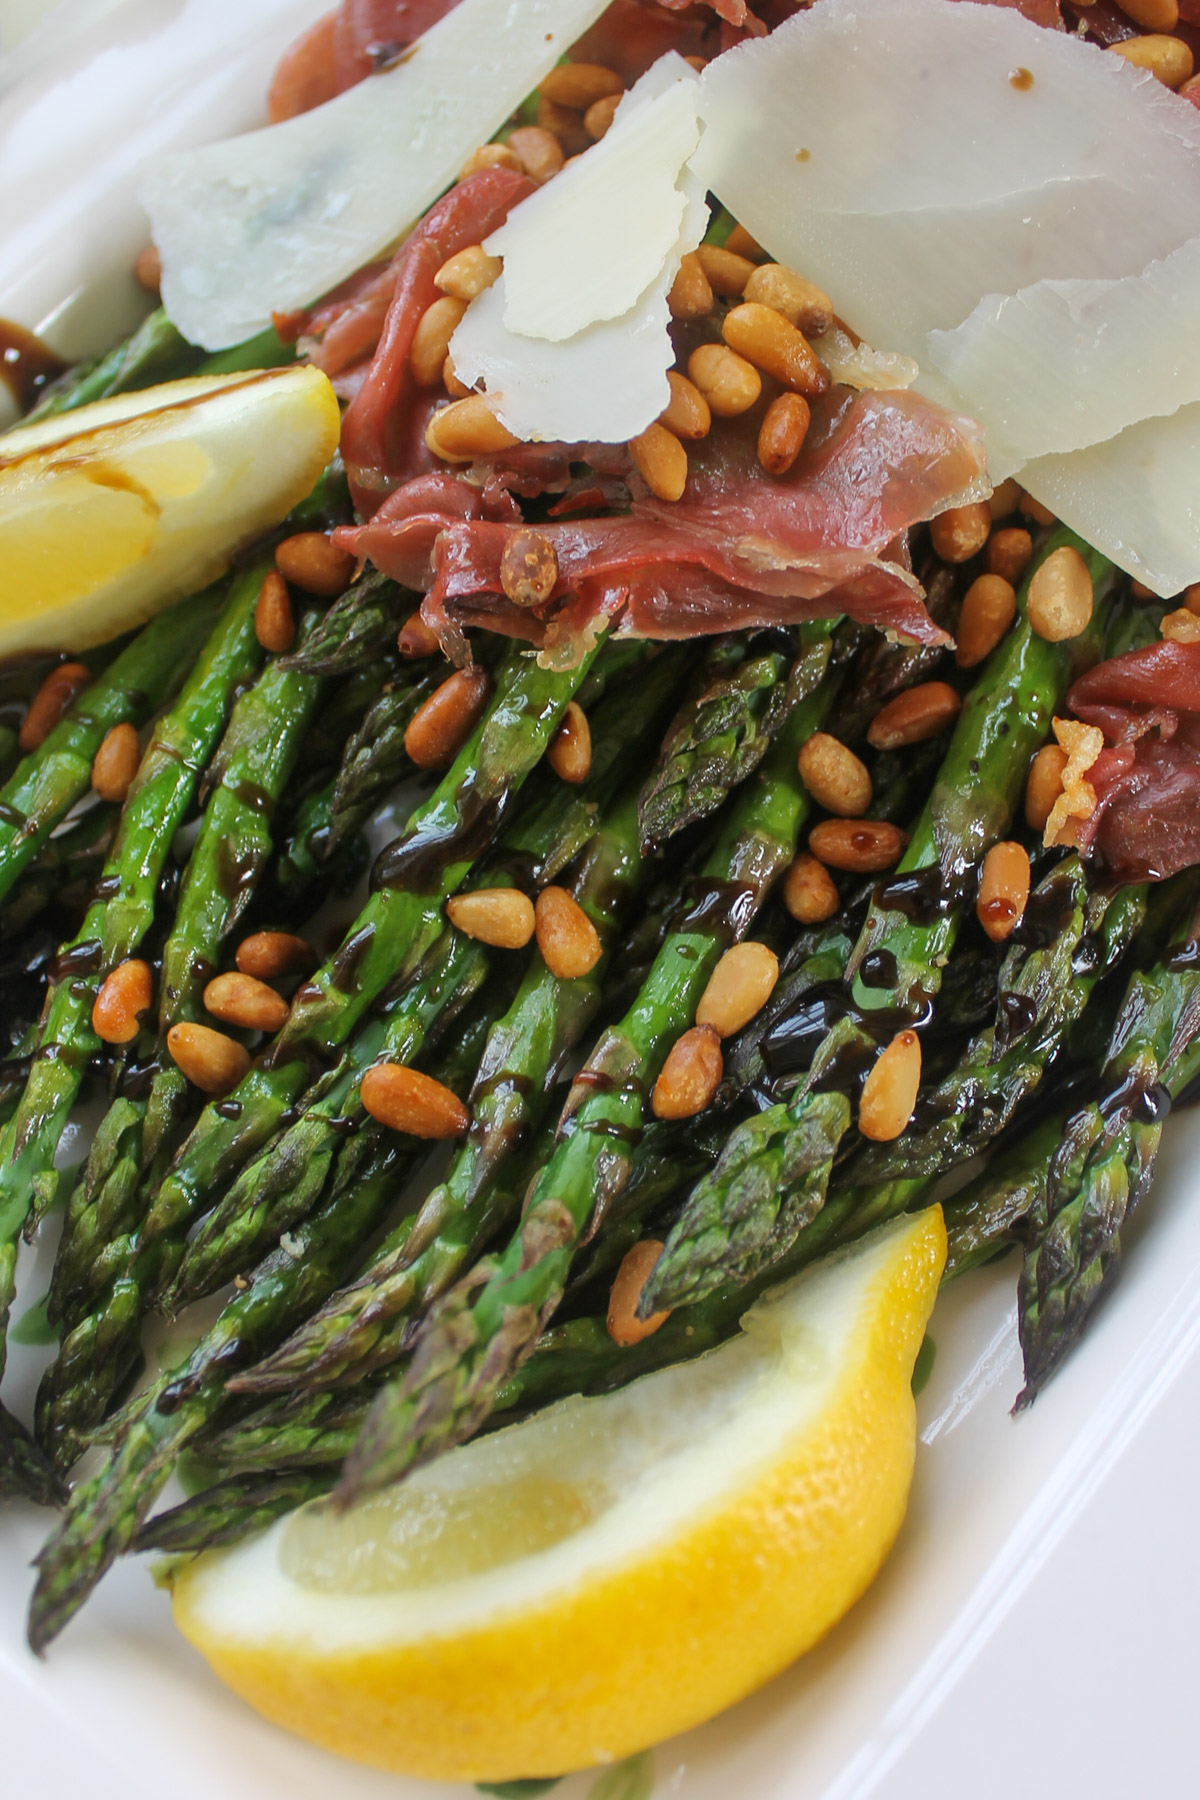 A close up of roasted asparagus tips with balsamic glaze and a topping made of crispy prosciutto and pine nuts.